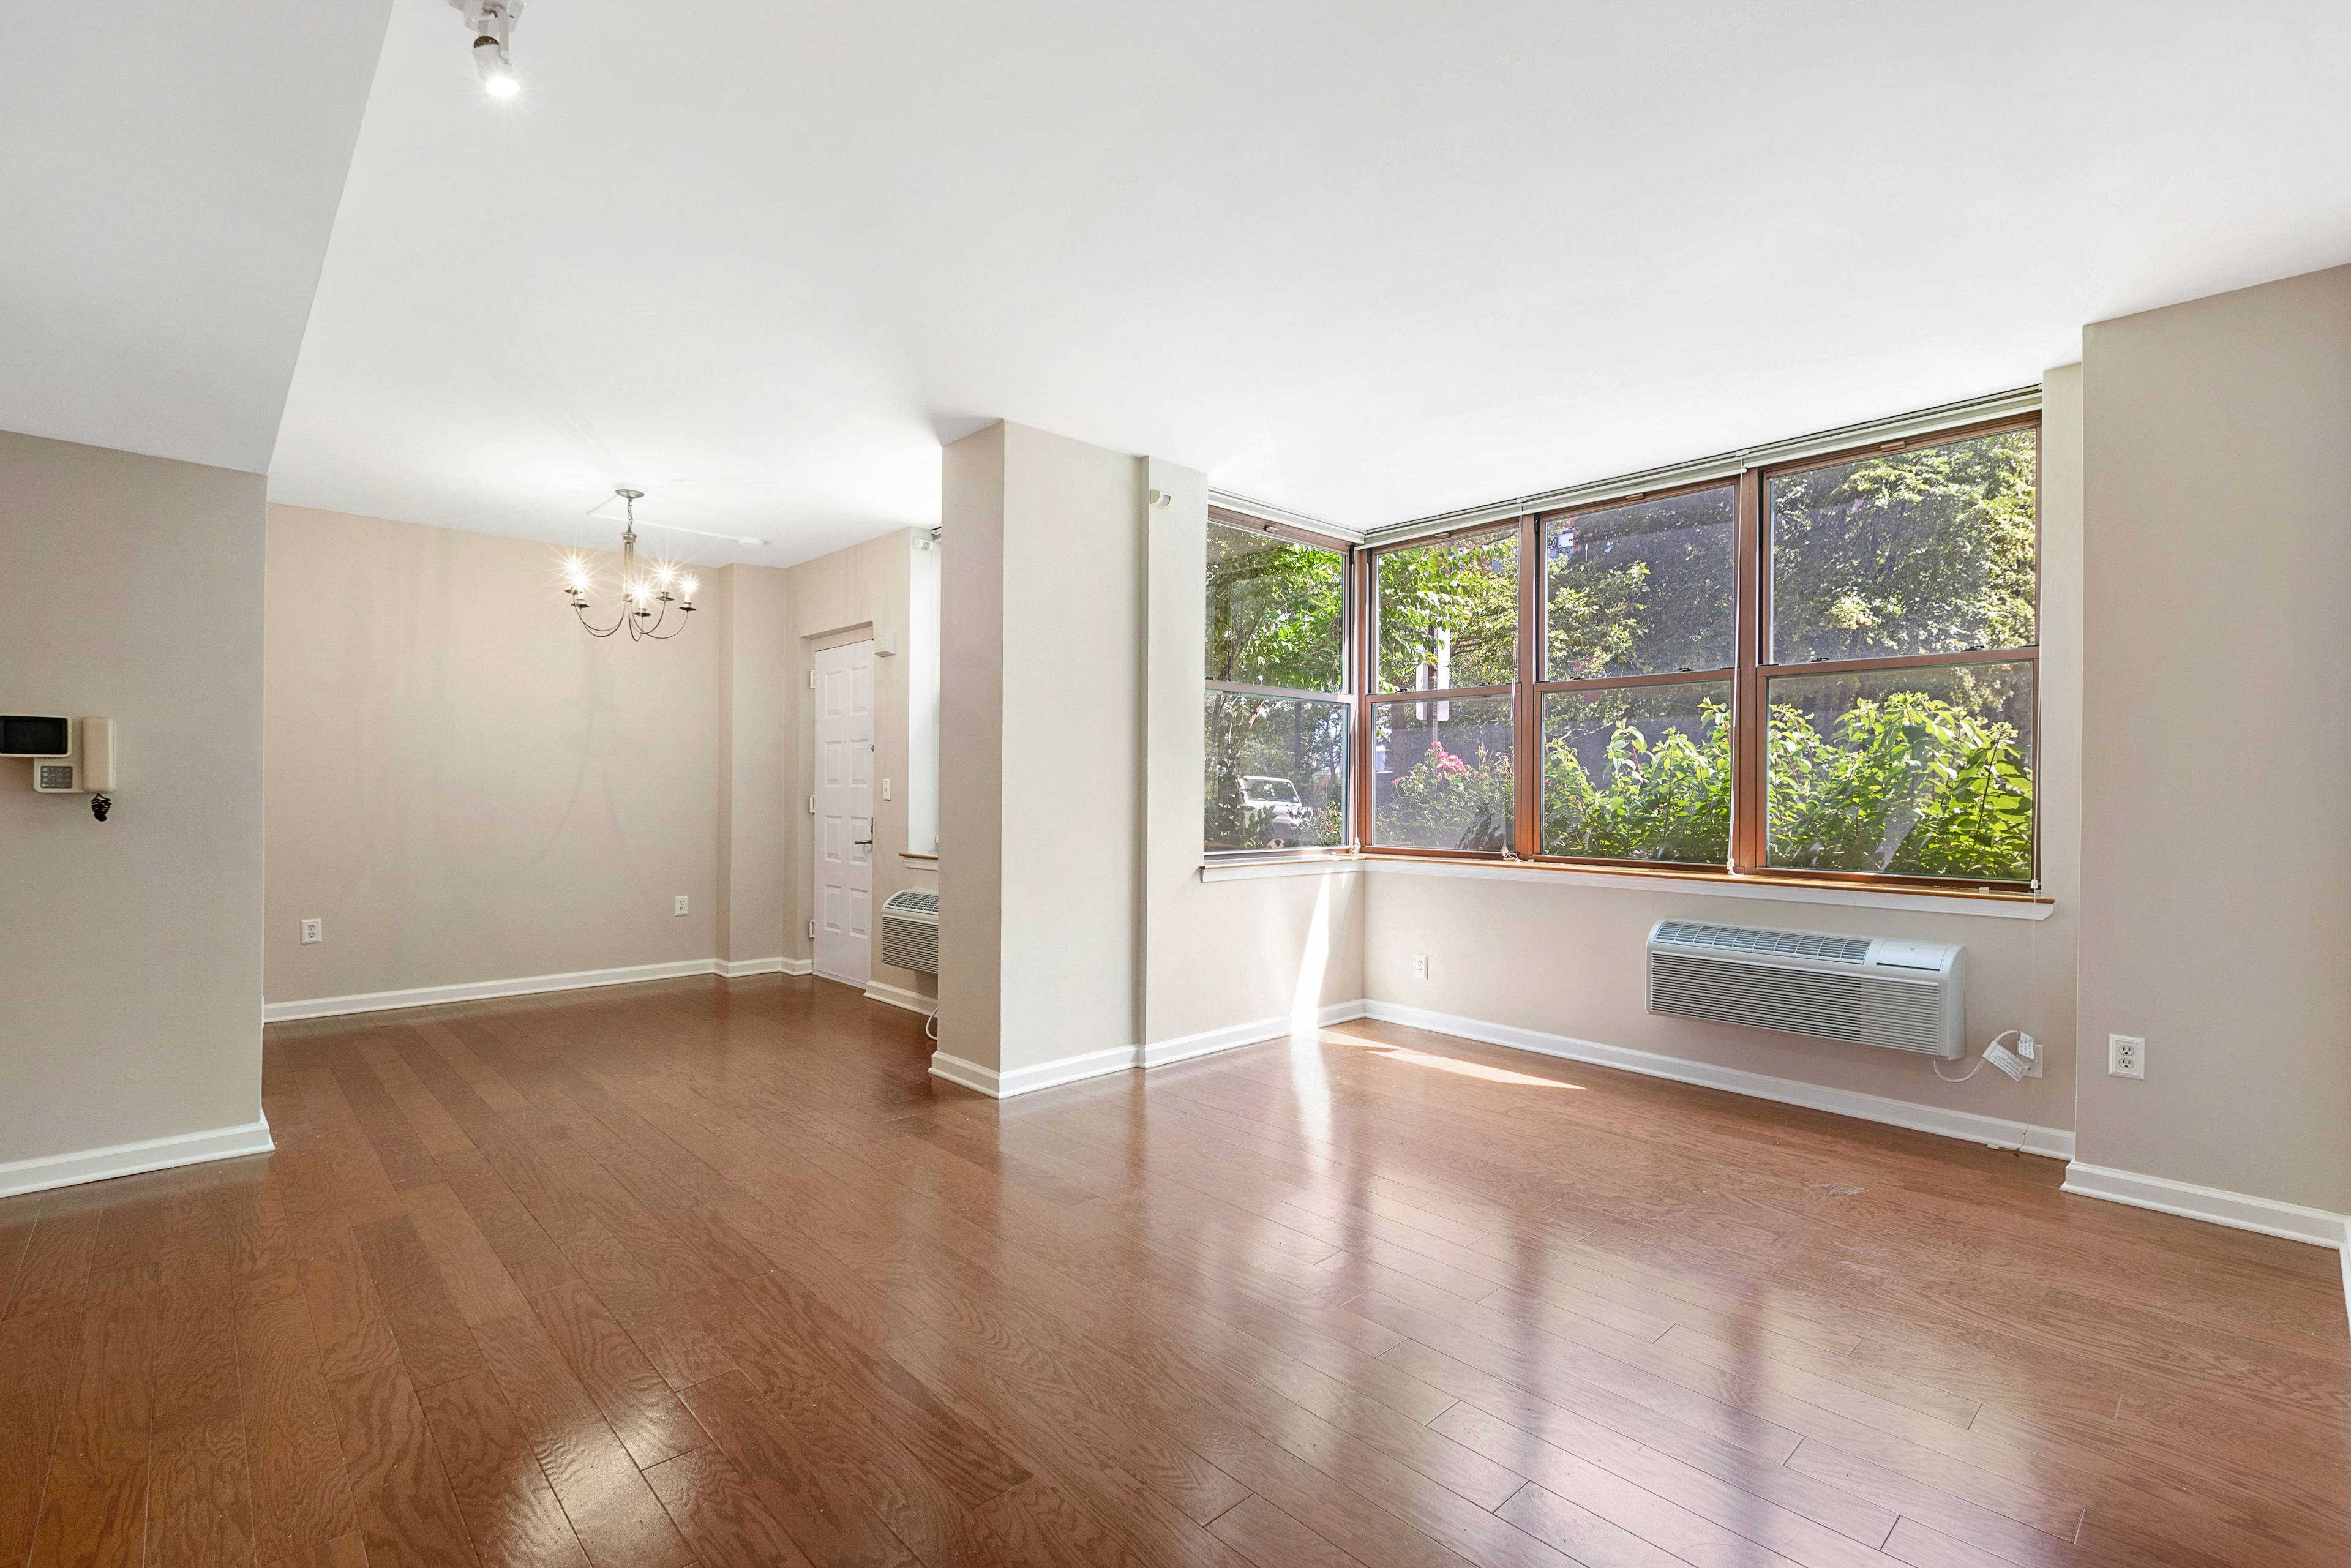 Large 3 Bed 2 Bath  Duplex 1468 SQ FT full-service luxury building located on the Hudson River